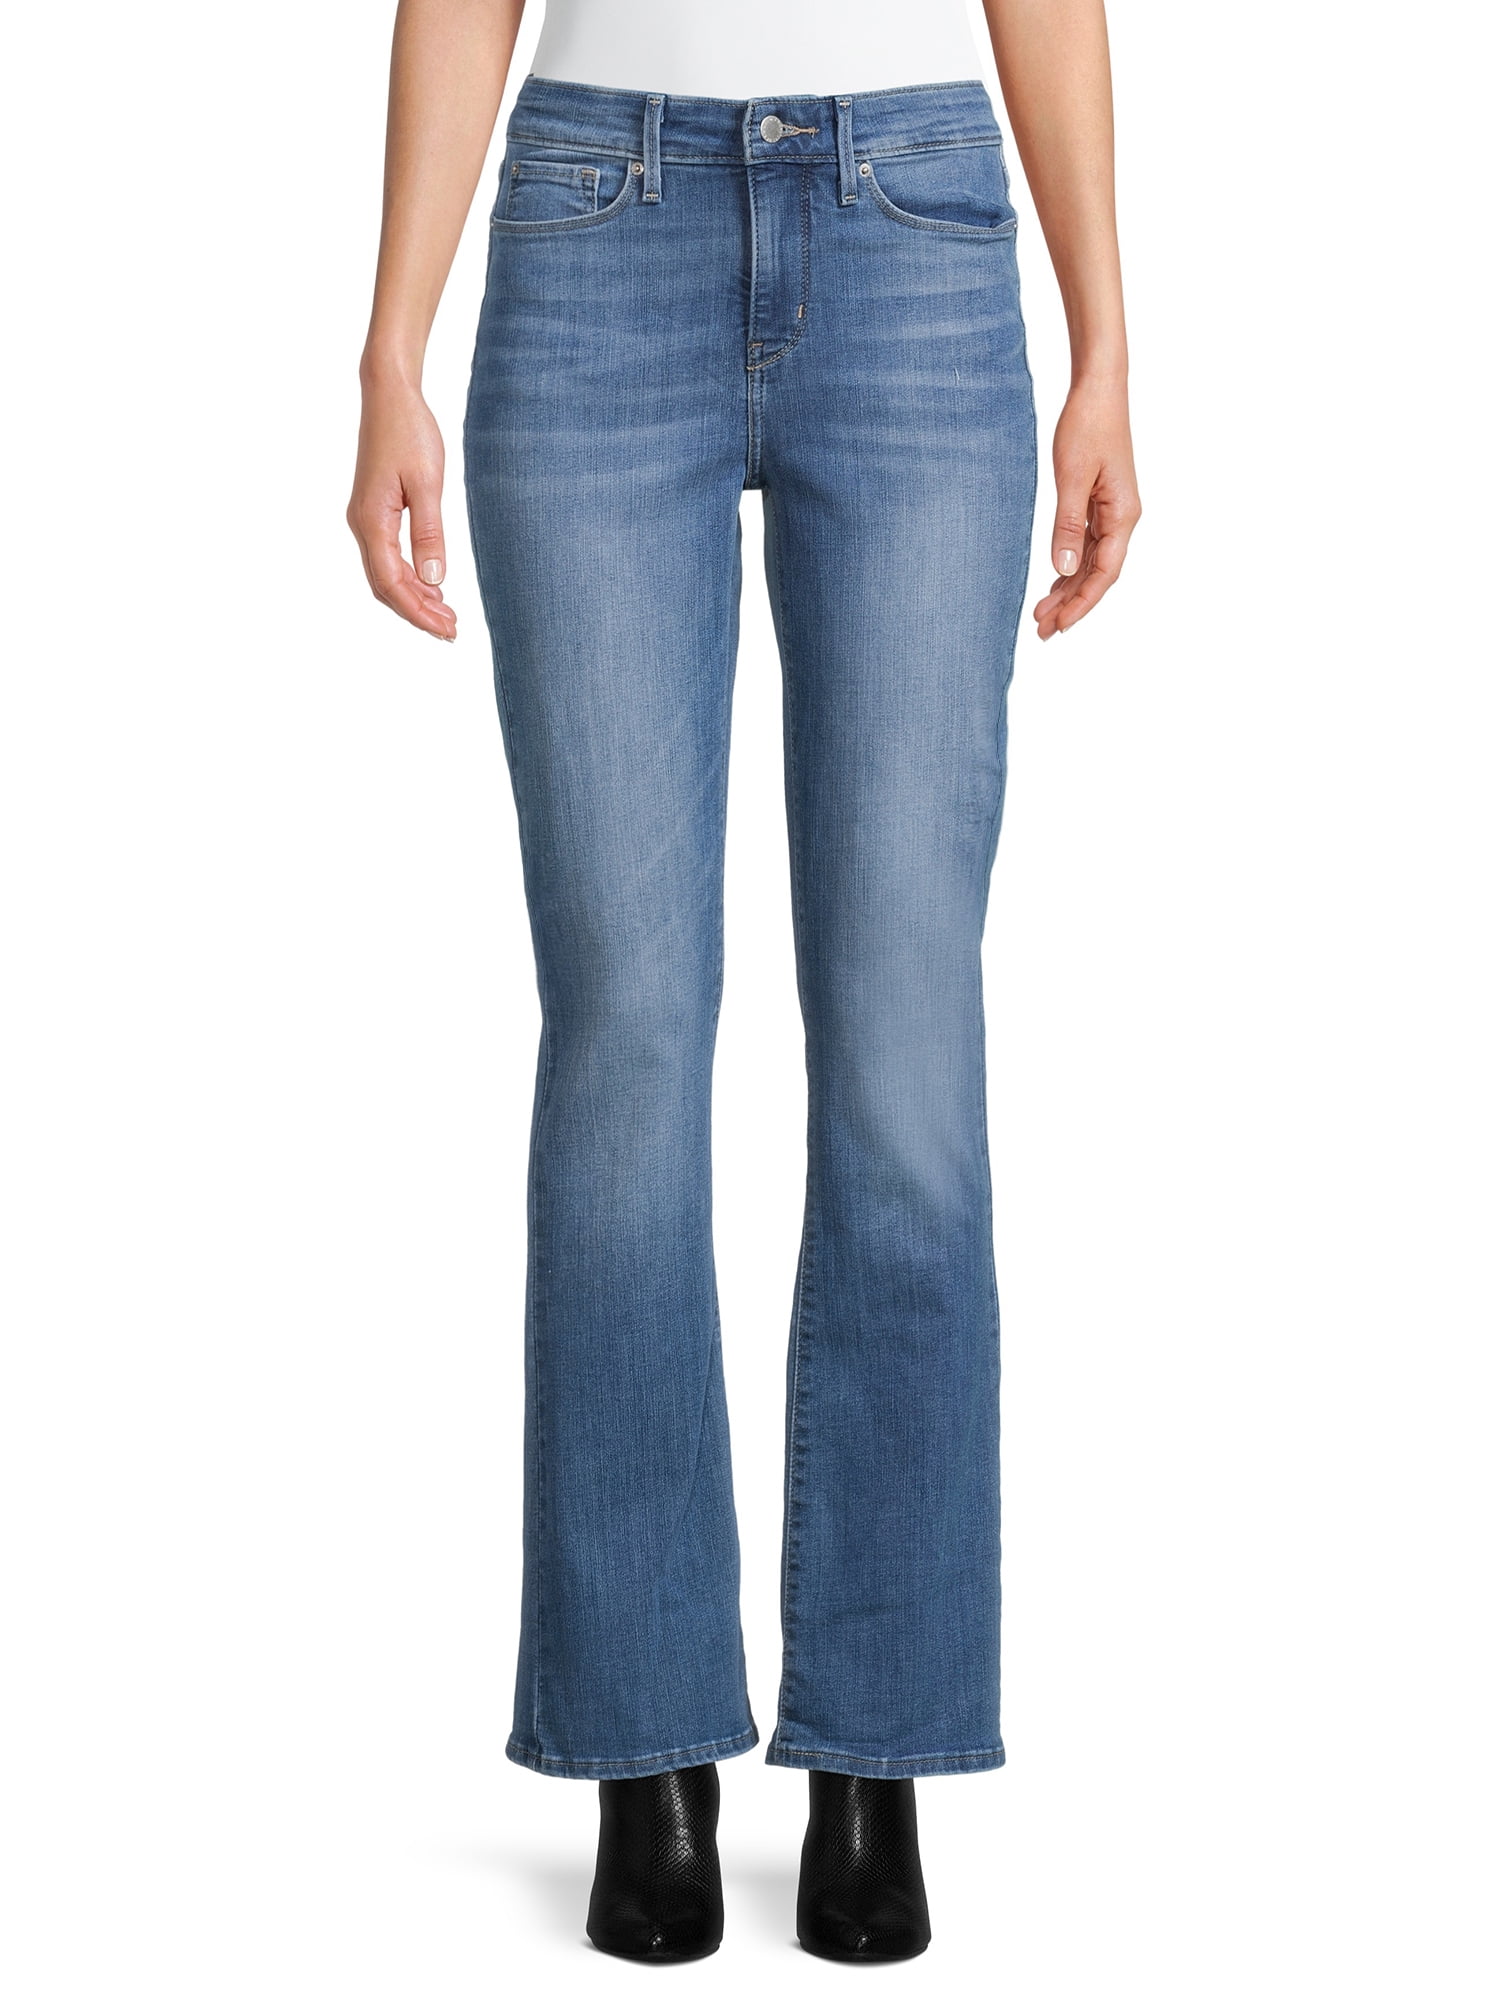 navn marv Panter Signature by Levi Strauss & Co. Women's Shaping Mid Rise Bootcut Jeans -  Walmart.com